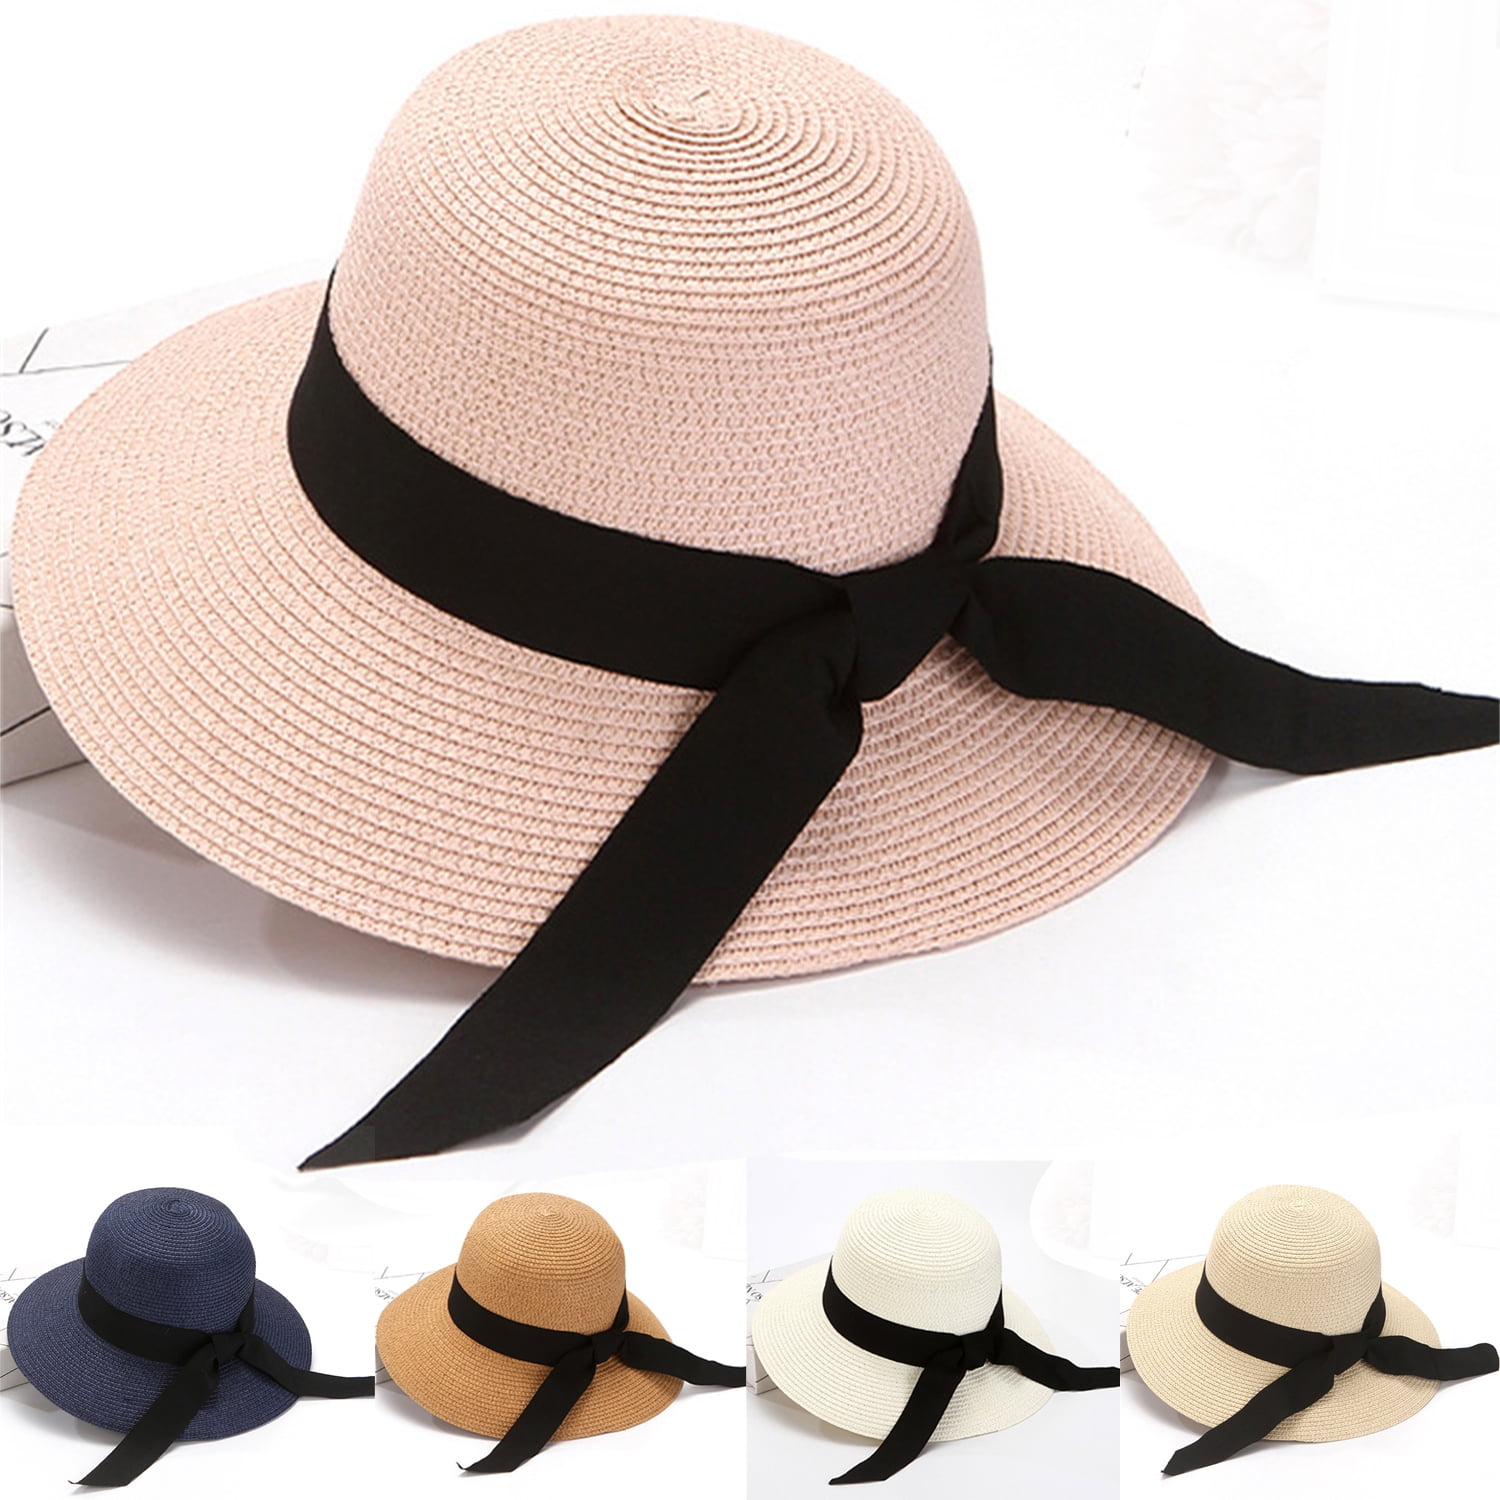 Yuanbang Women Sun Protection Rolled Up Straw Hat Soft Shape Wide Brim Summer Beach Sun Hat UV Protection, adult Unisex, Size: One size, Beige